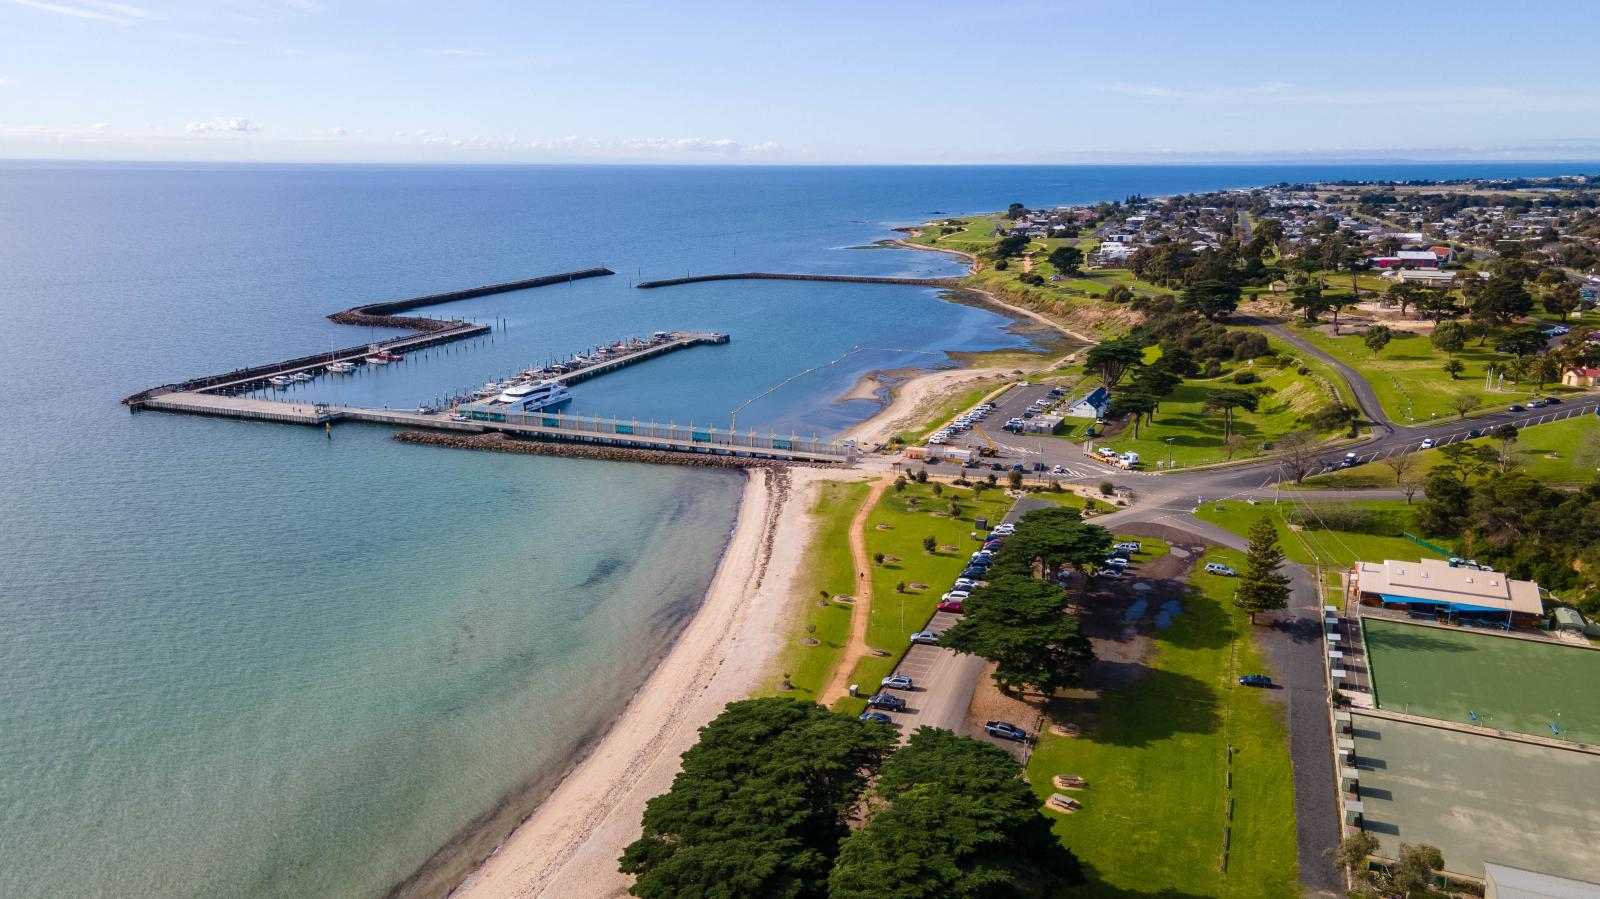 Gutter Cleaners Drone gets an outlook over Port Arlington